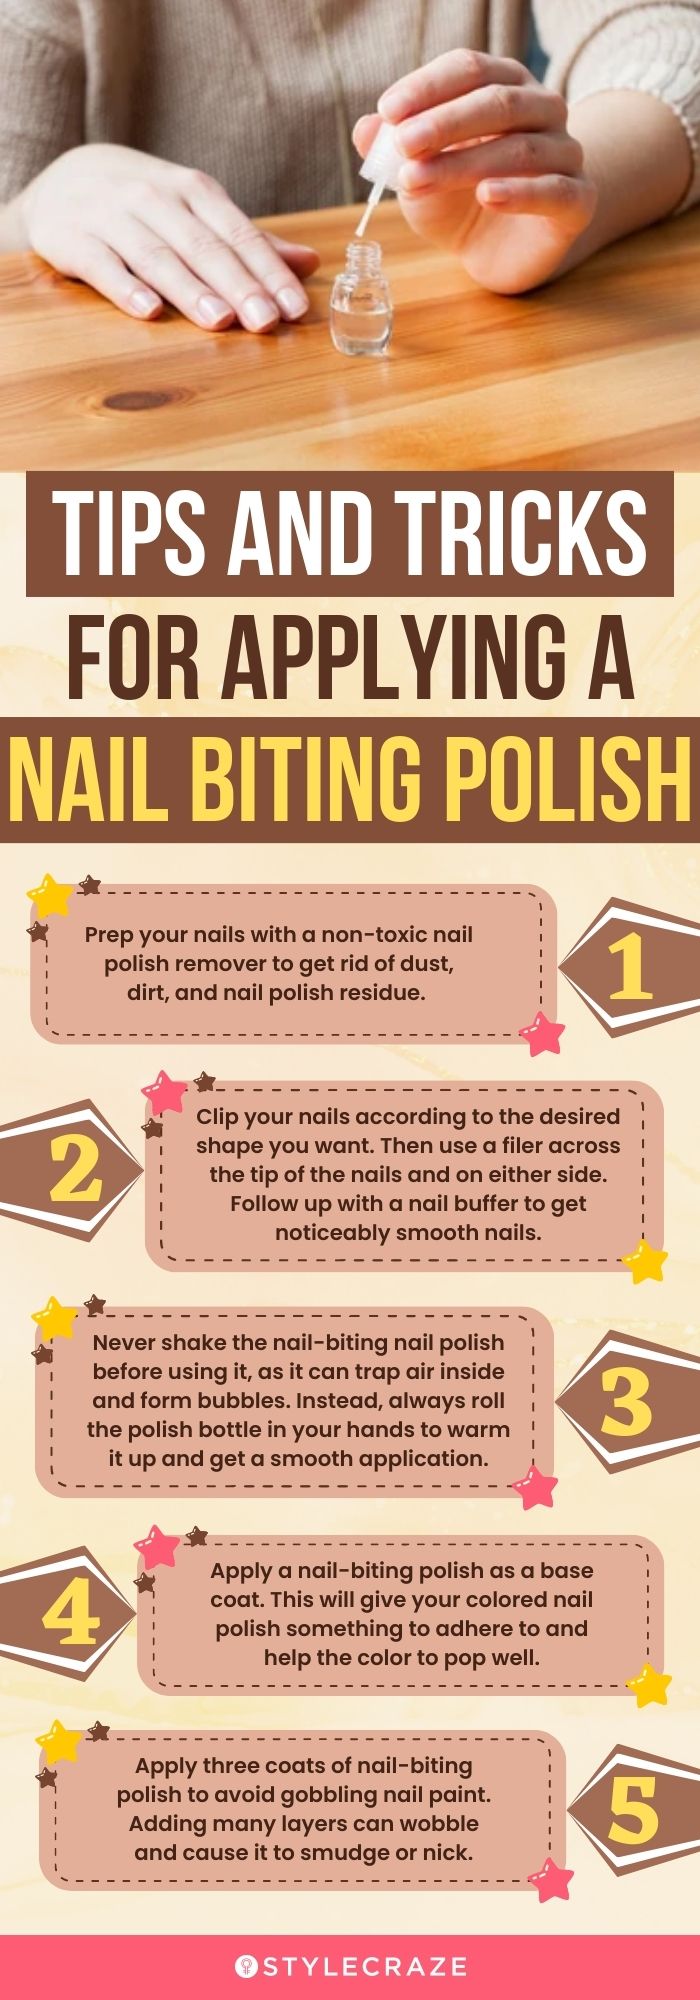 Tips And Tricks For Applying A Nail Biting Polish (infographic)